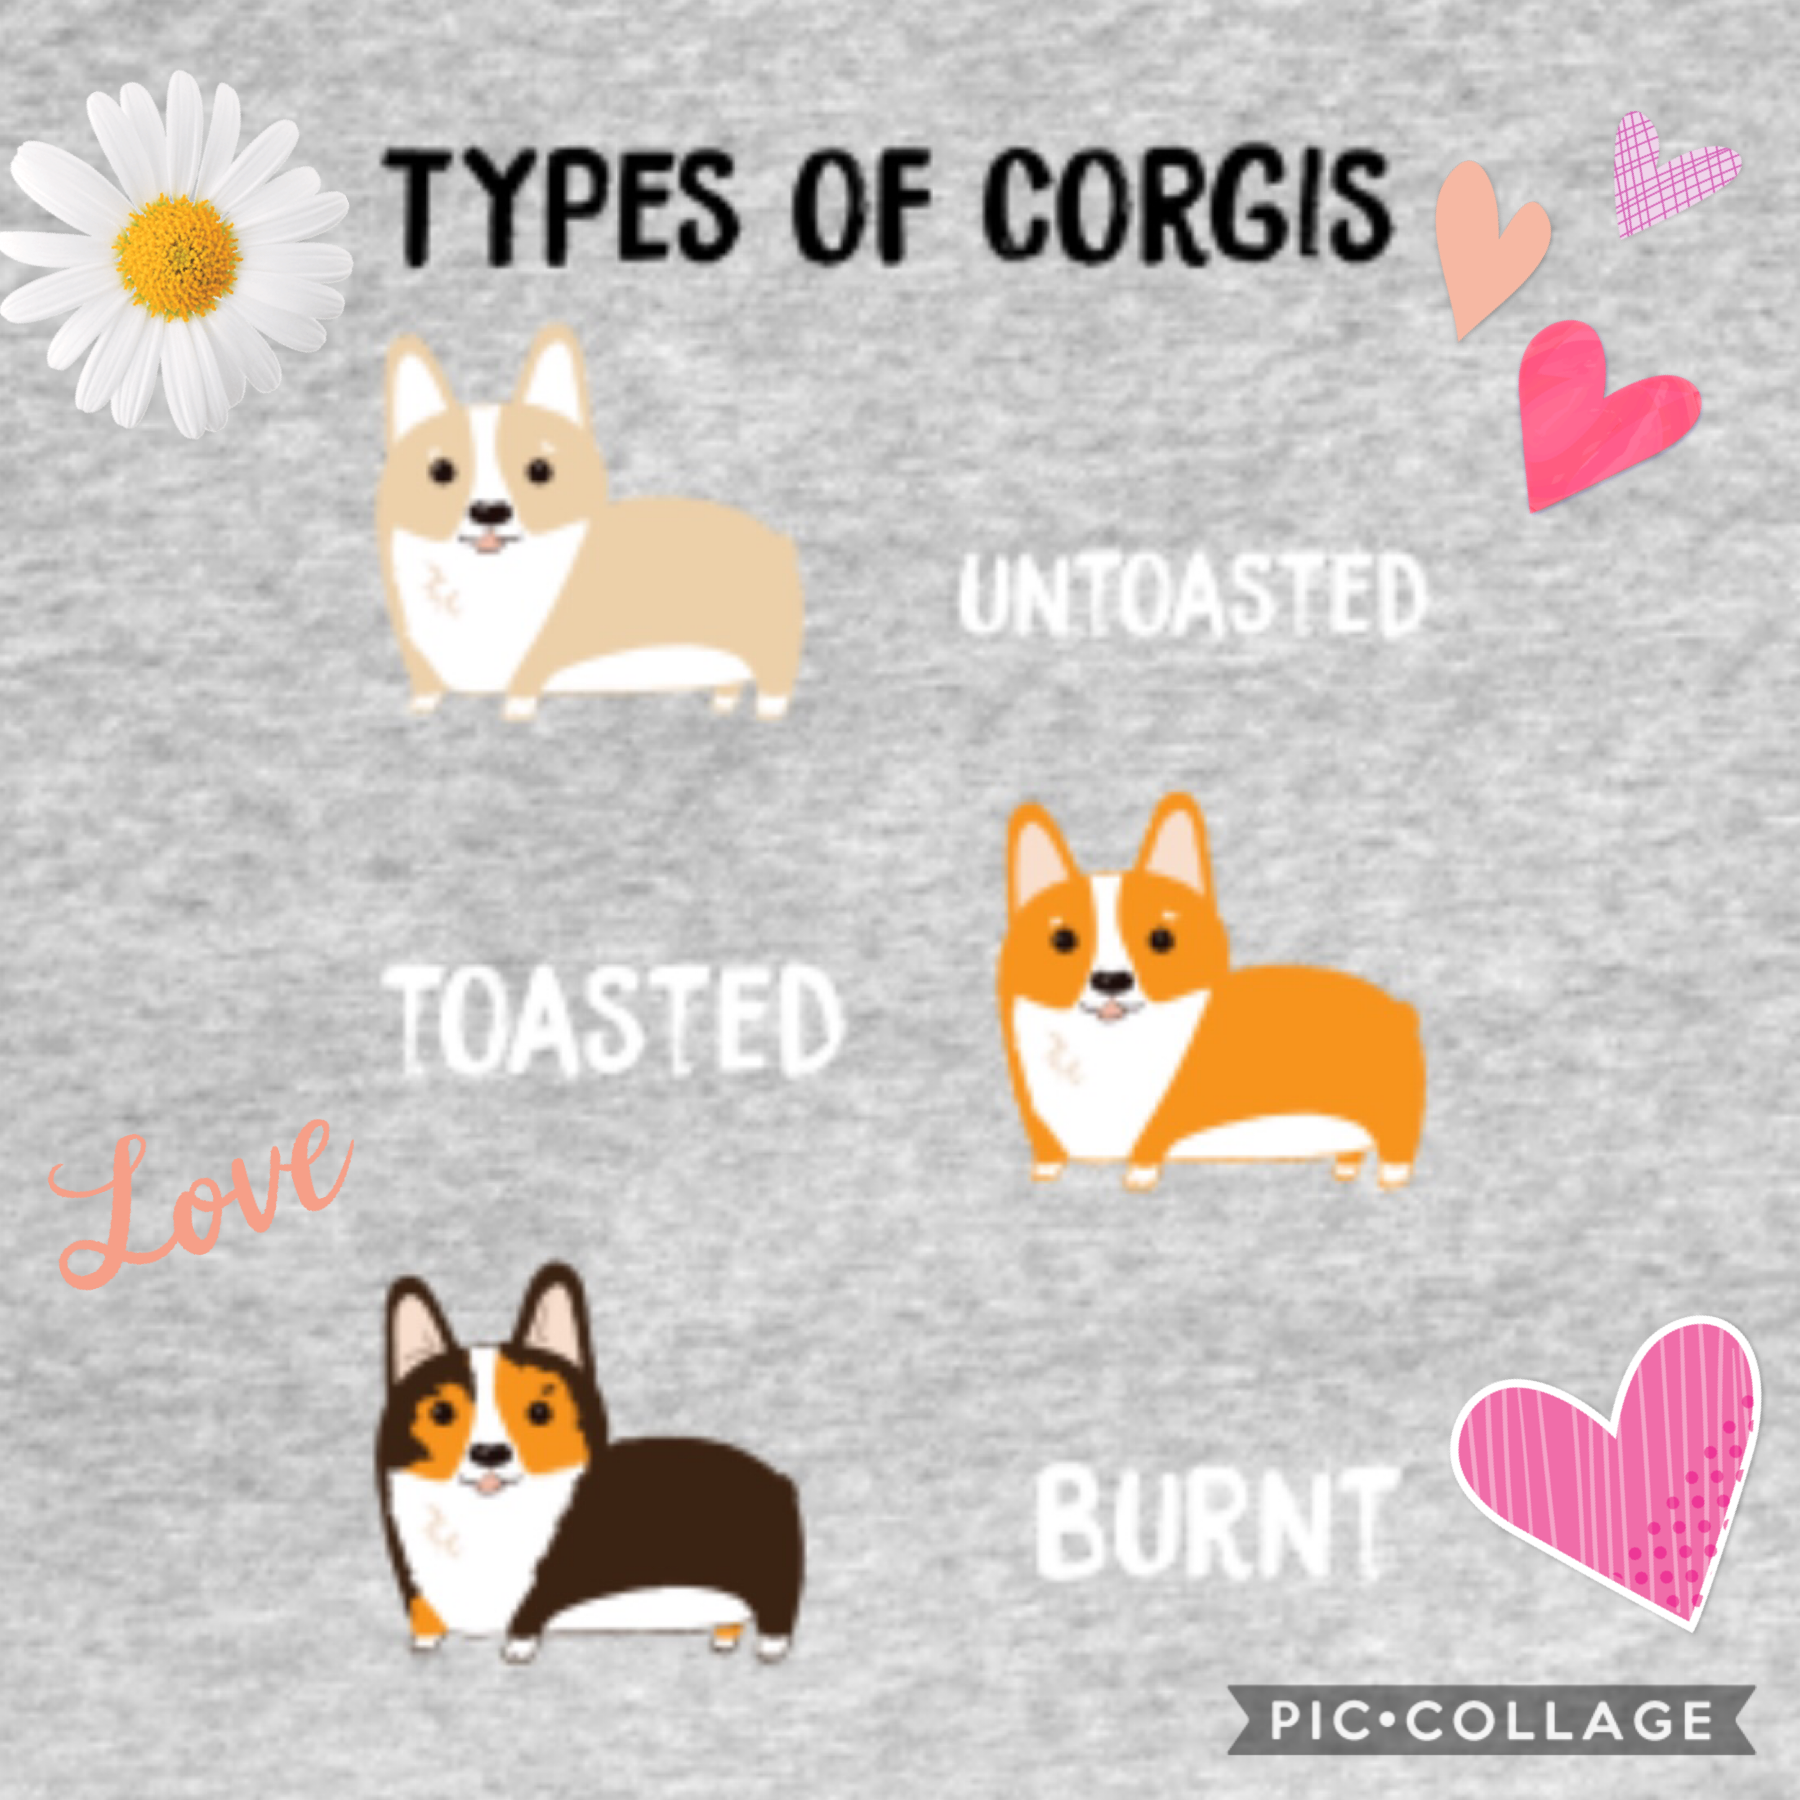 What type of corgi do you have???